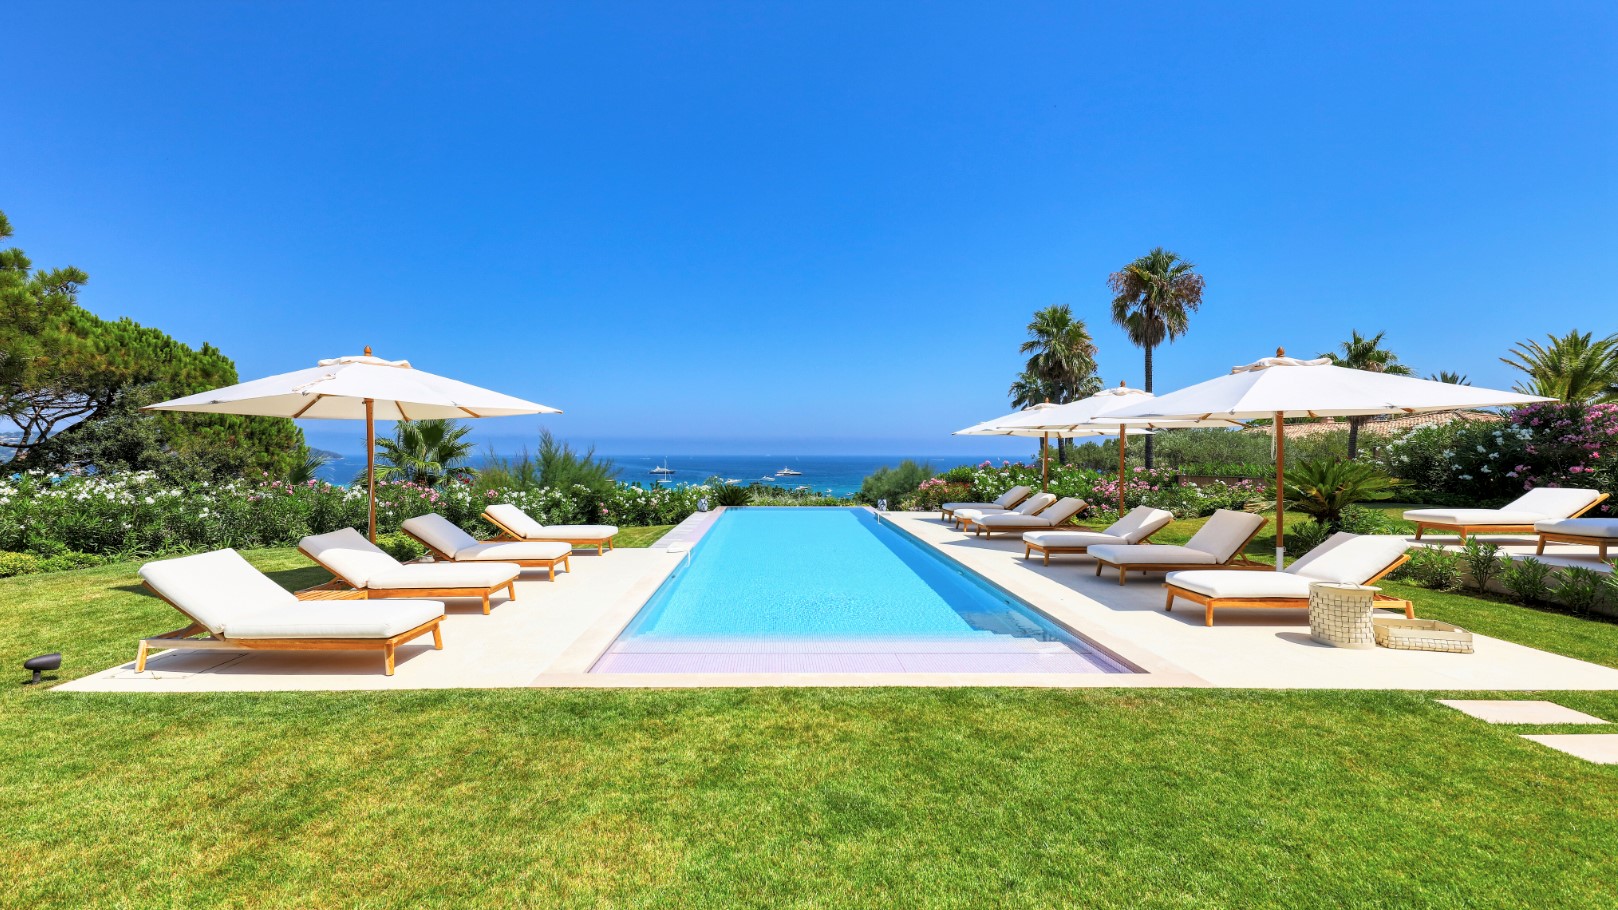 St. Tropez Luxury Villa Rental with infinity pool beautifully overlooking the ocean in the heat of the day